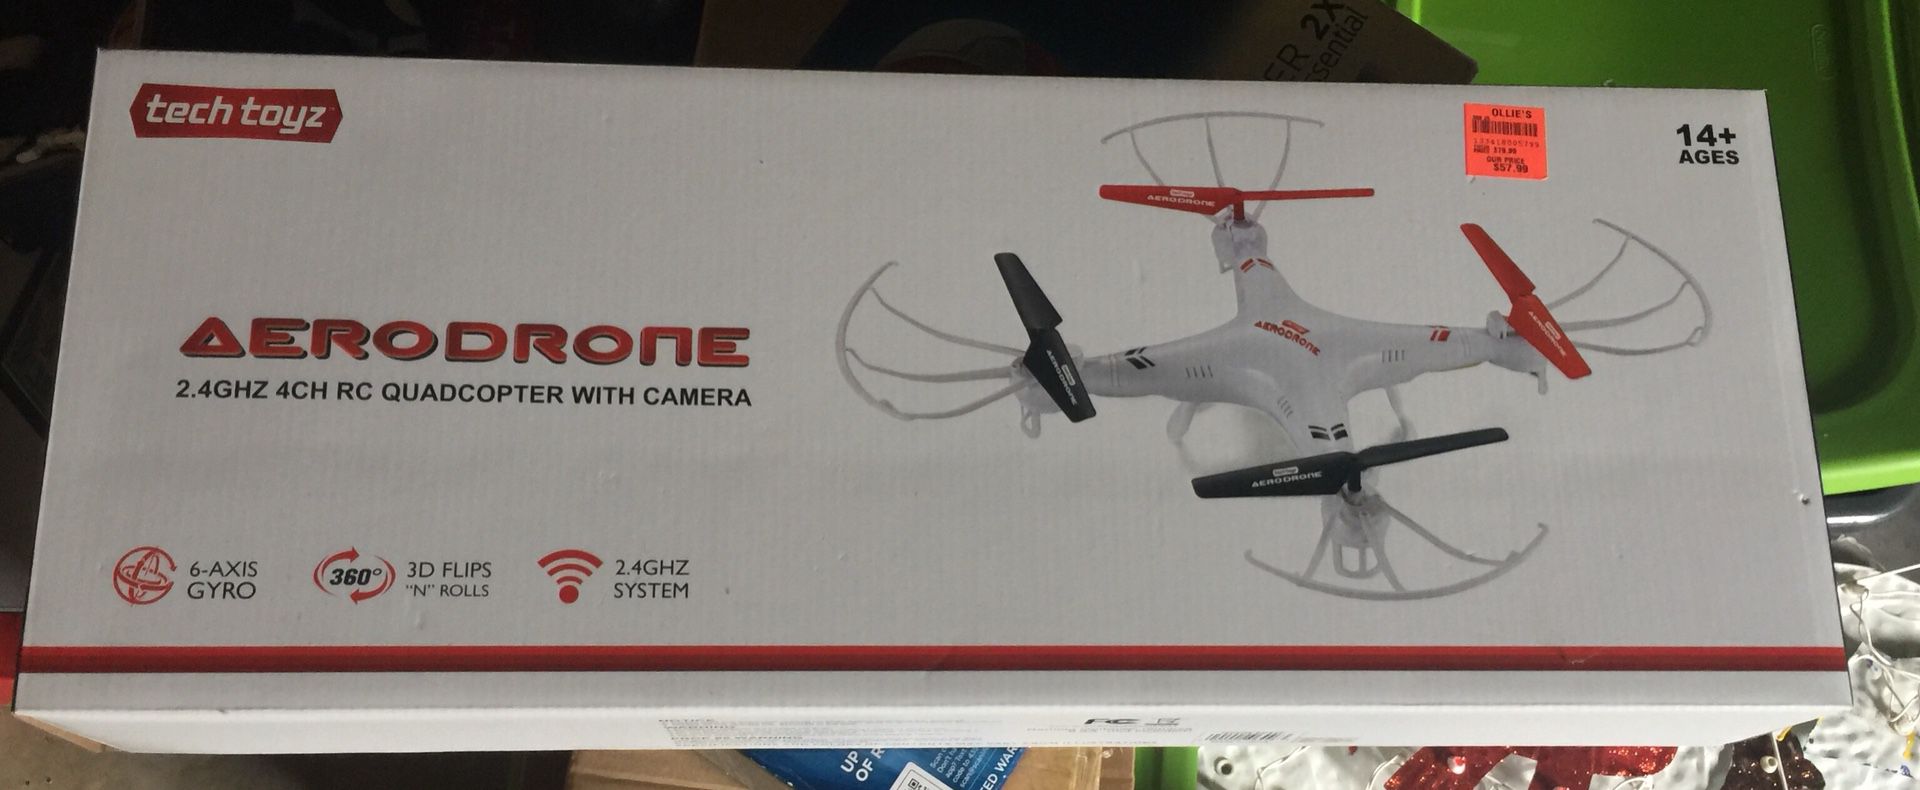 2.4GHZ 4CH RC Quadcopter With Camera